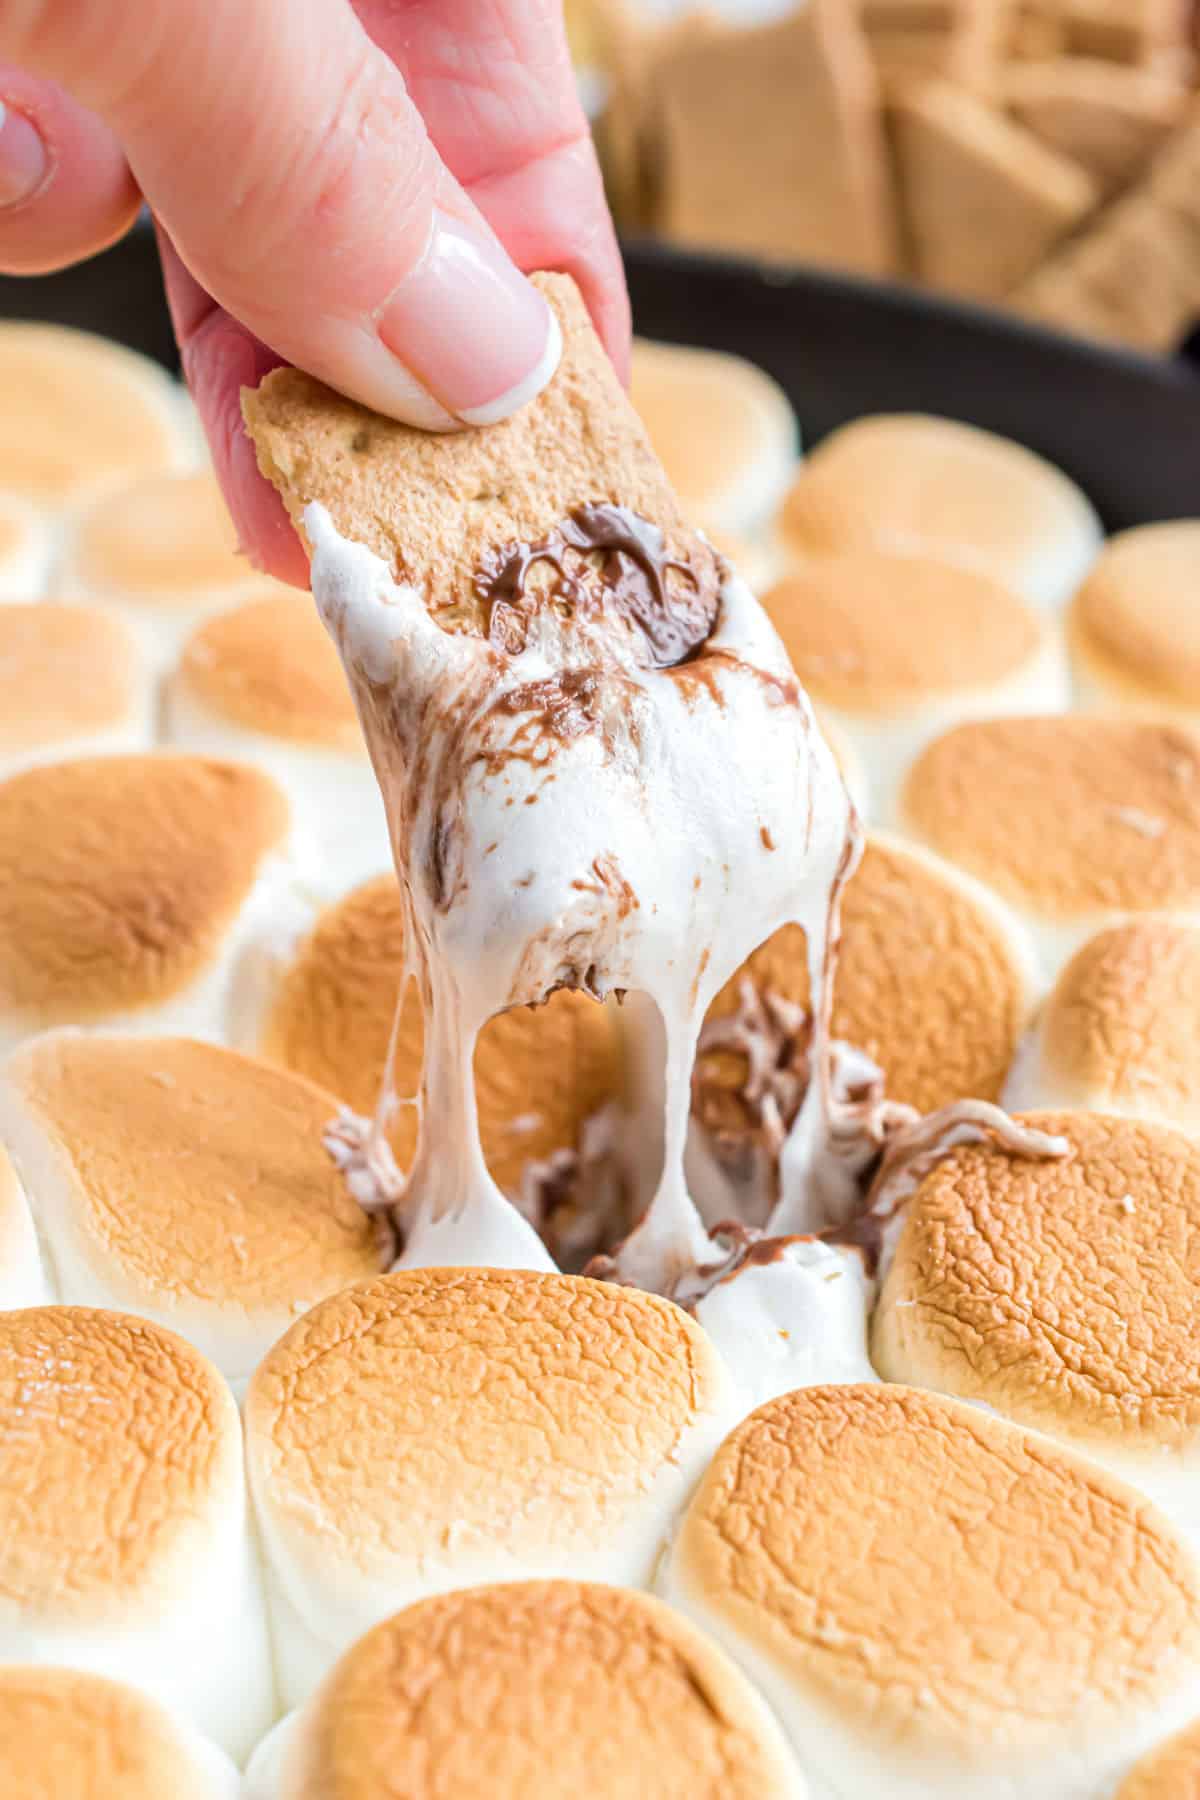 Graham cracker being dipped into a skillet of chocolate and melted marshmallow.